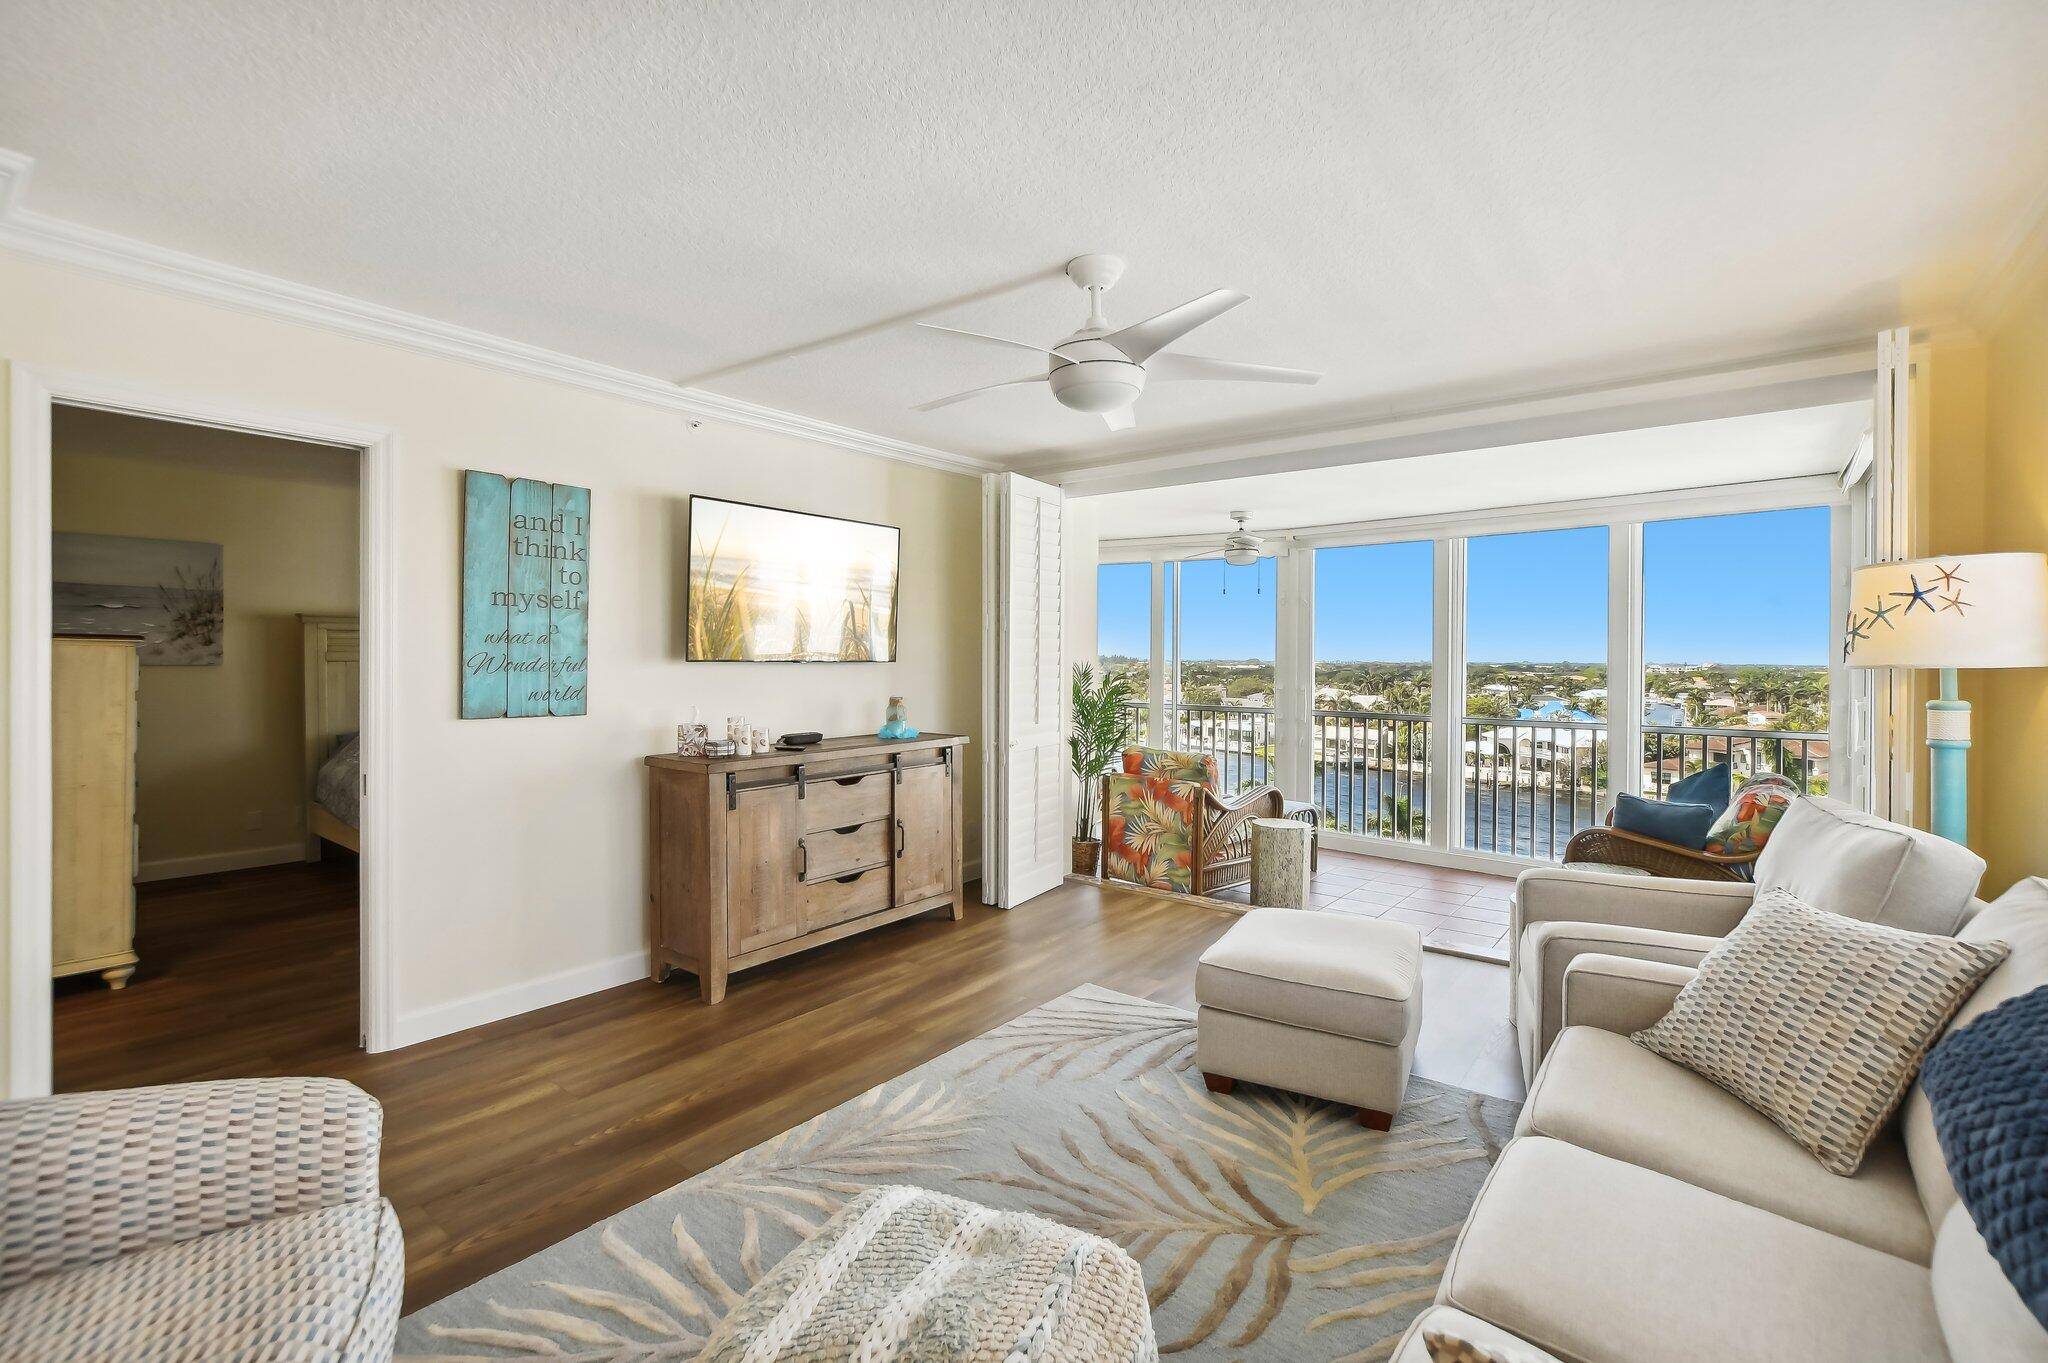 Step into luxury with this fully furnished, recently updated 2 bed corner condo boasting stunning views.